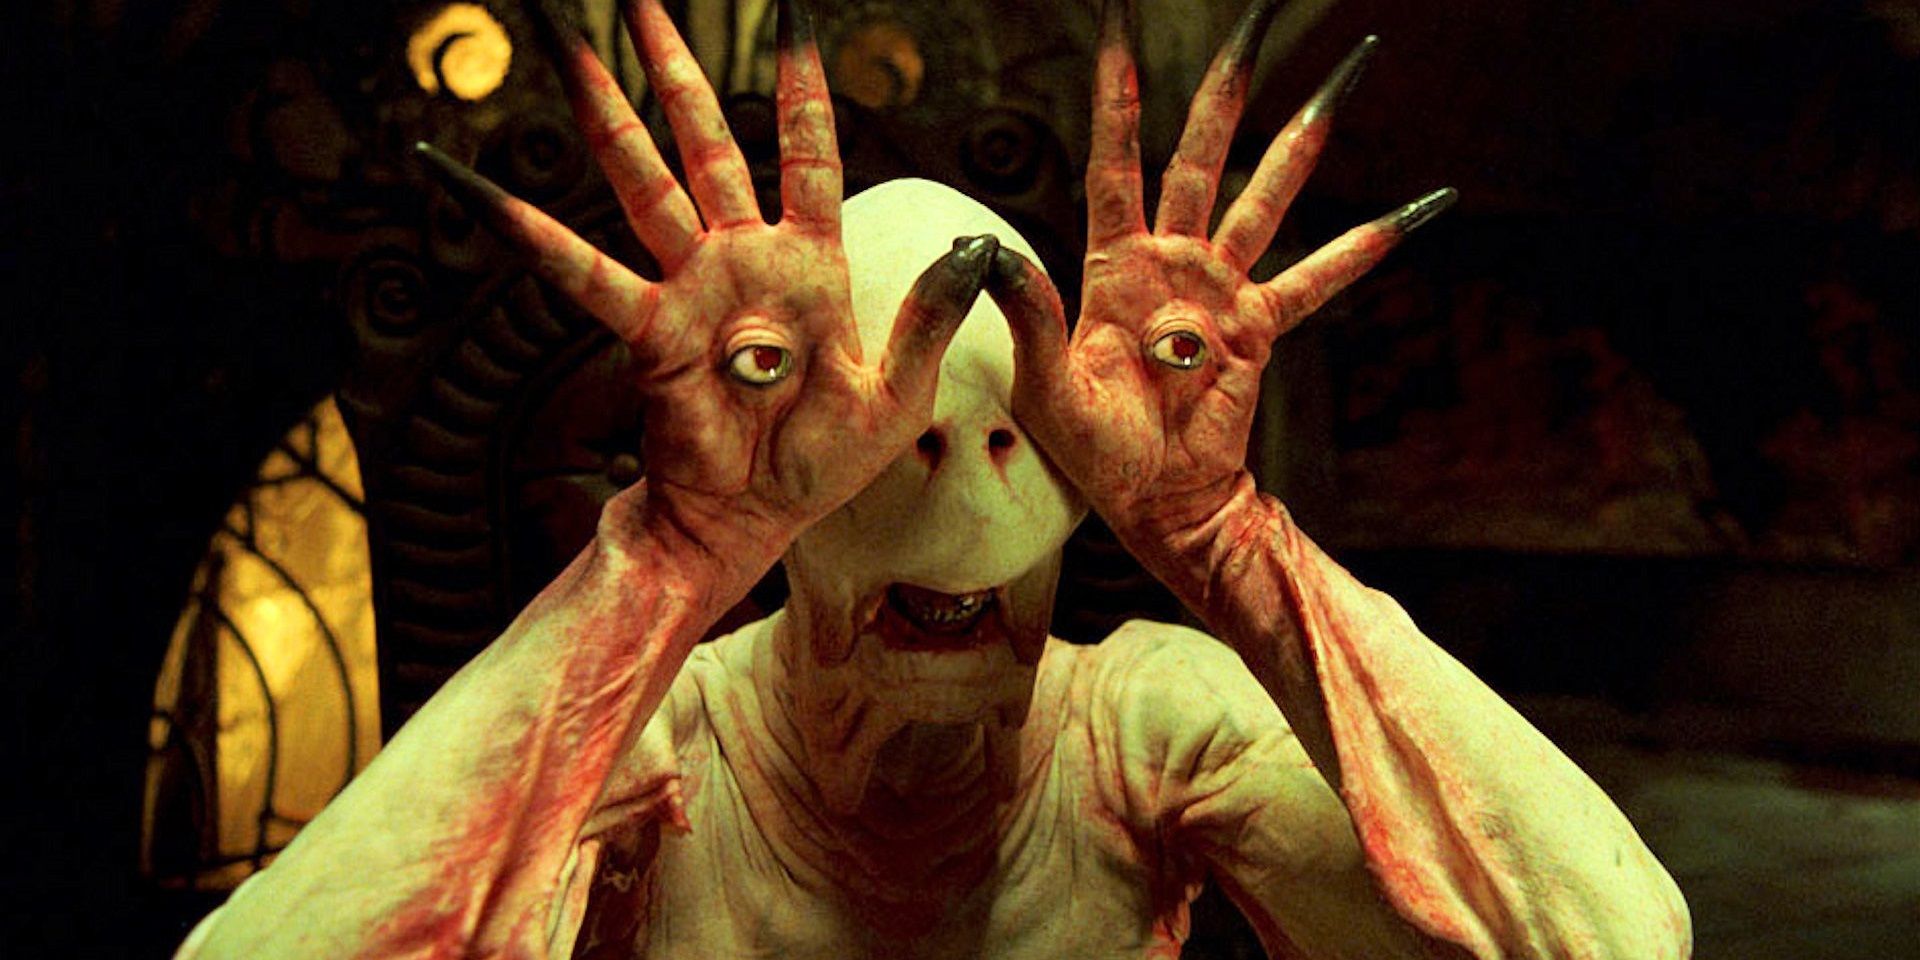 Pan’s Labyrinth & 9 Other Fantasy Movies With Social Commentary